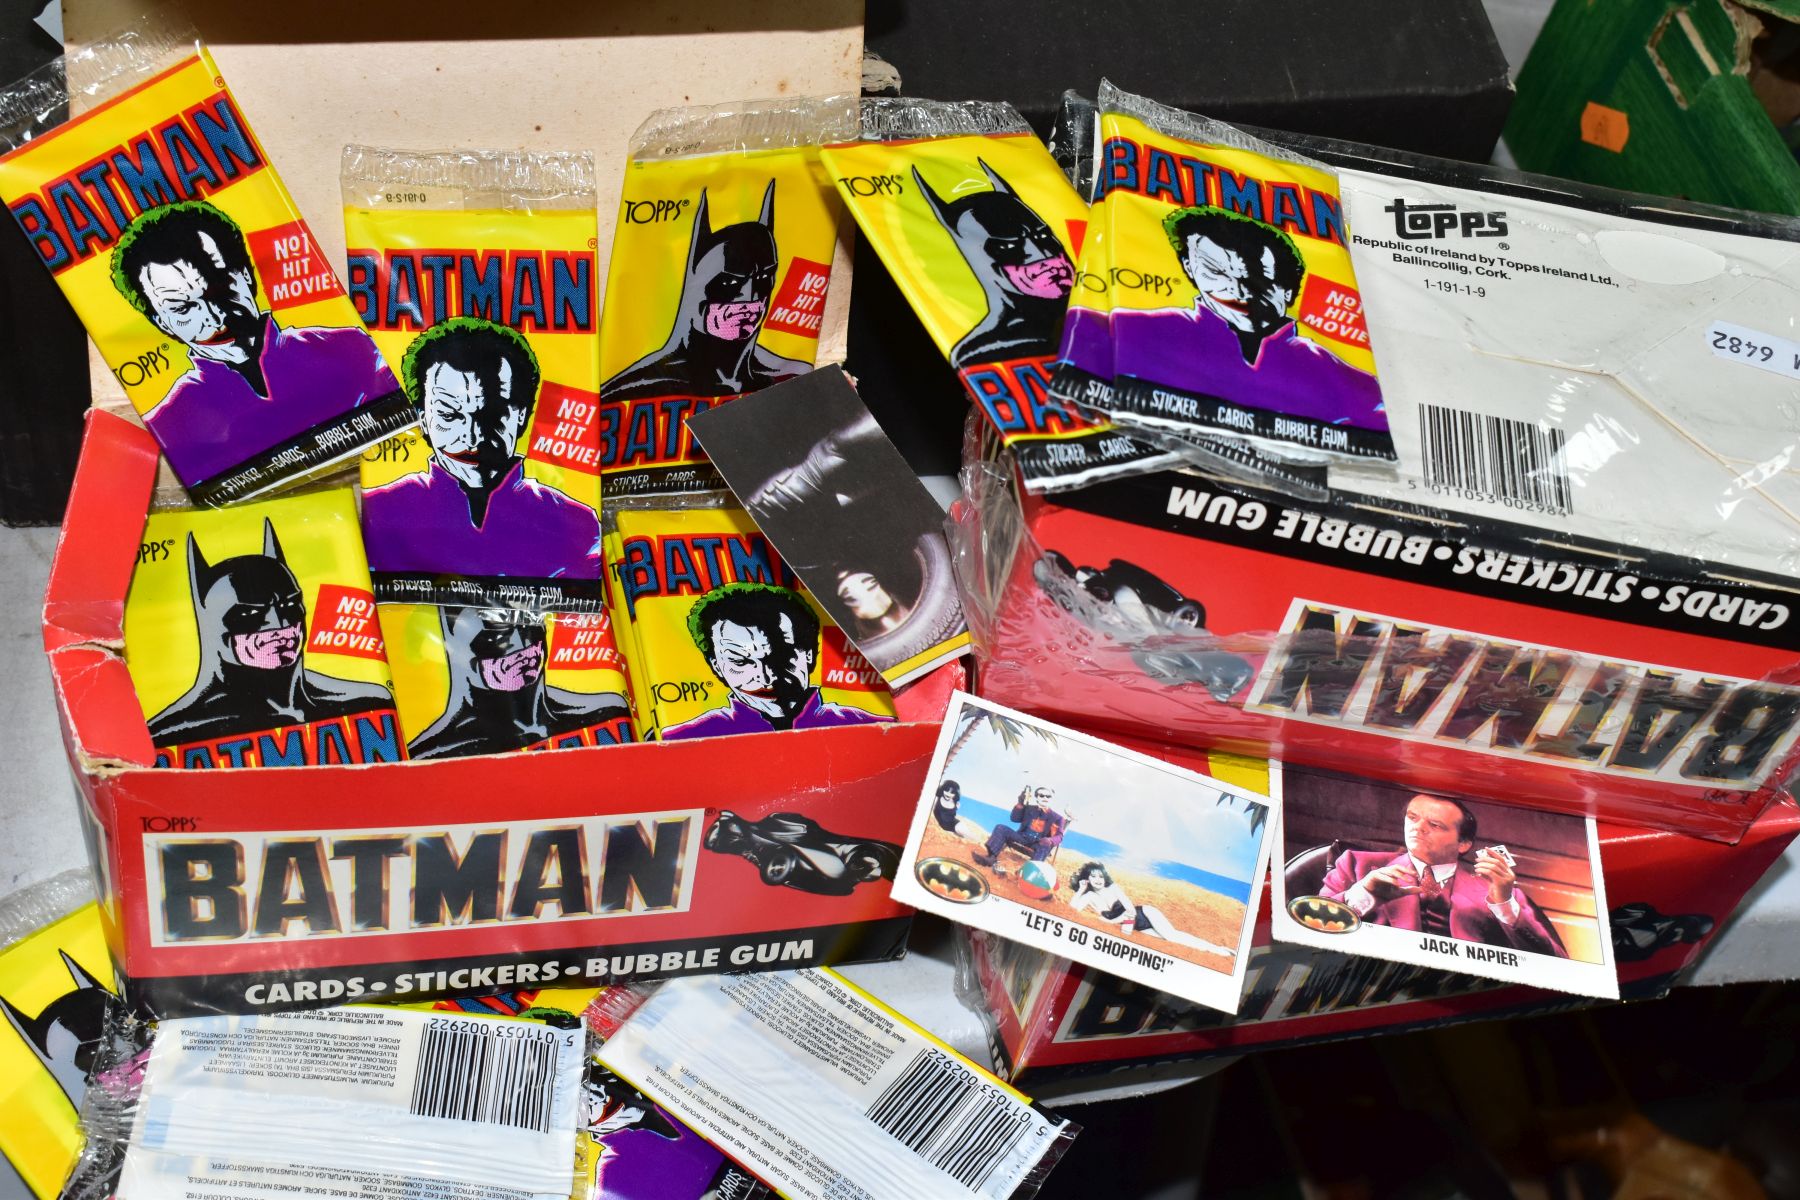 THREE BOXES OF TOPPS BATMAN THE MOVIE CARDS FROM 1989, two are unopened and still factory sealed - Image 2 of 2